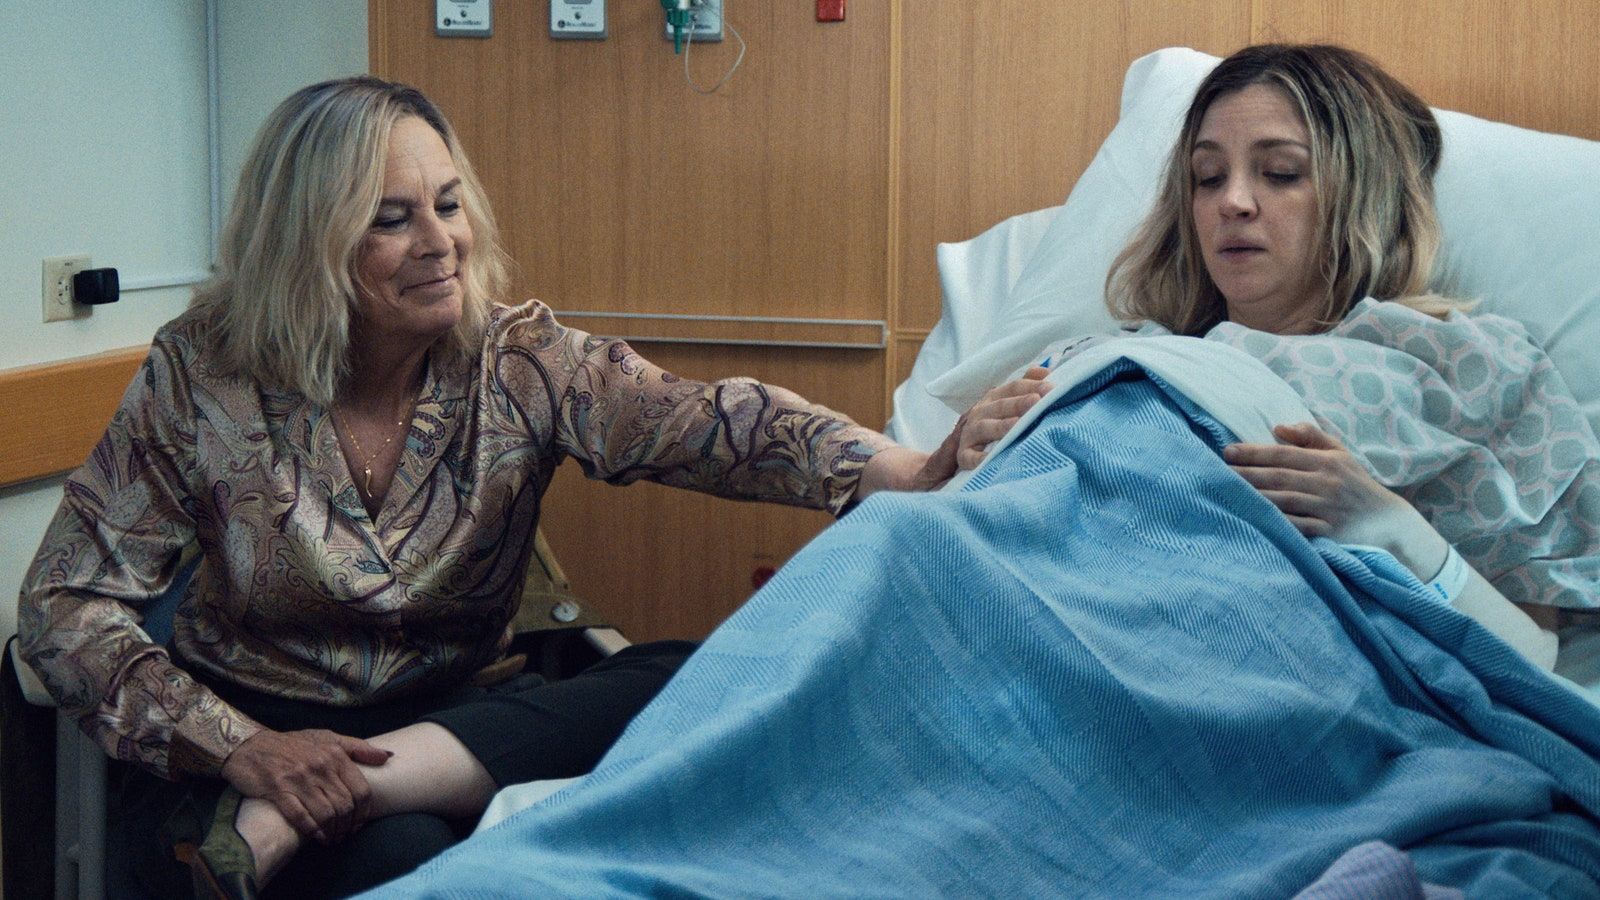 The Bear's third season sees Natalie  giving birth in the episode “Ice Chips”